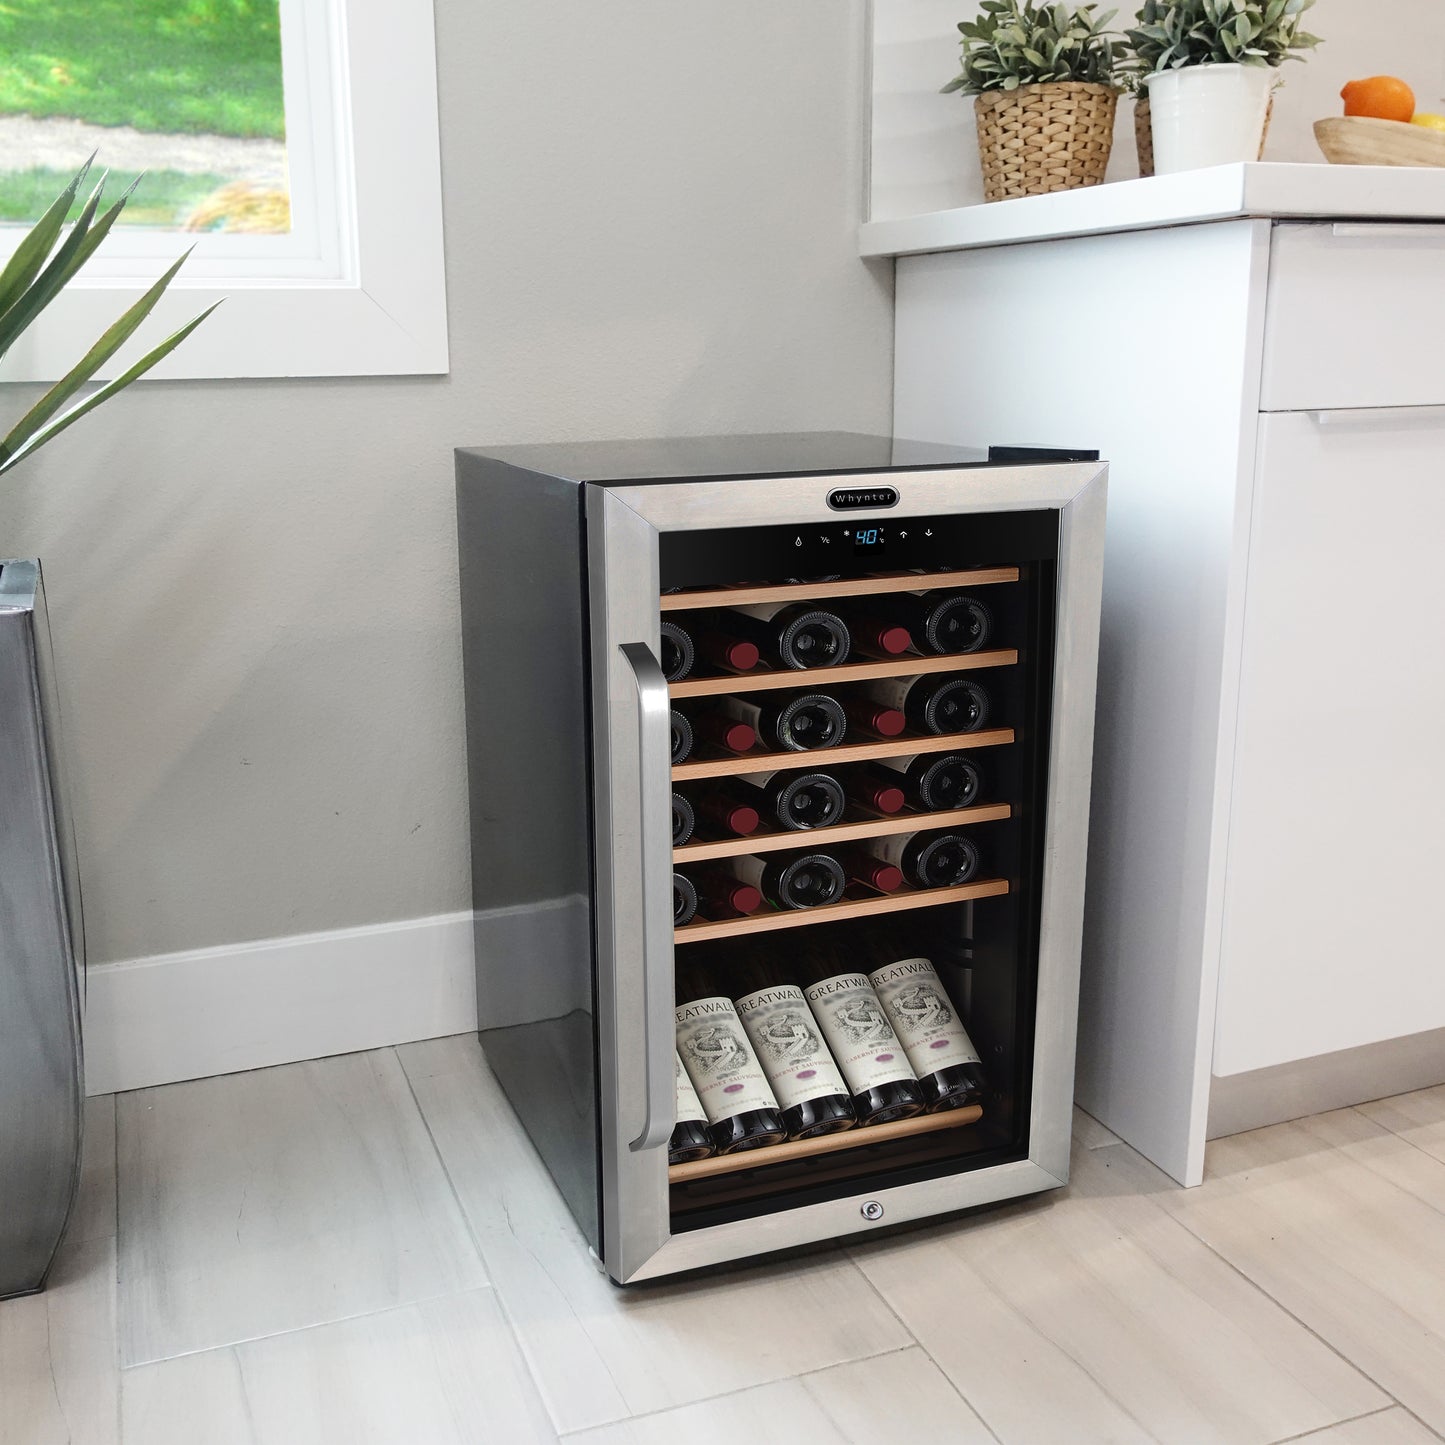 A stainless steel wine fridge with 166 bottles, LED lights, and adjustable shelves.